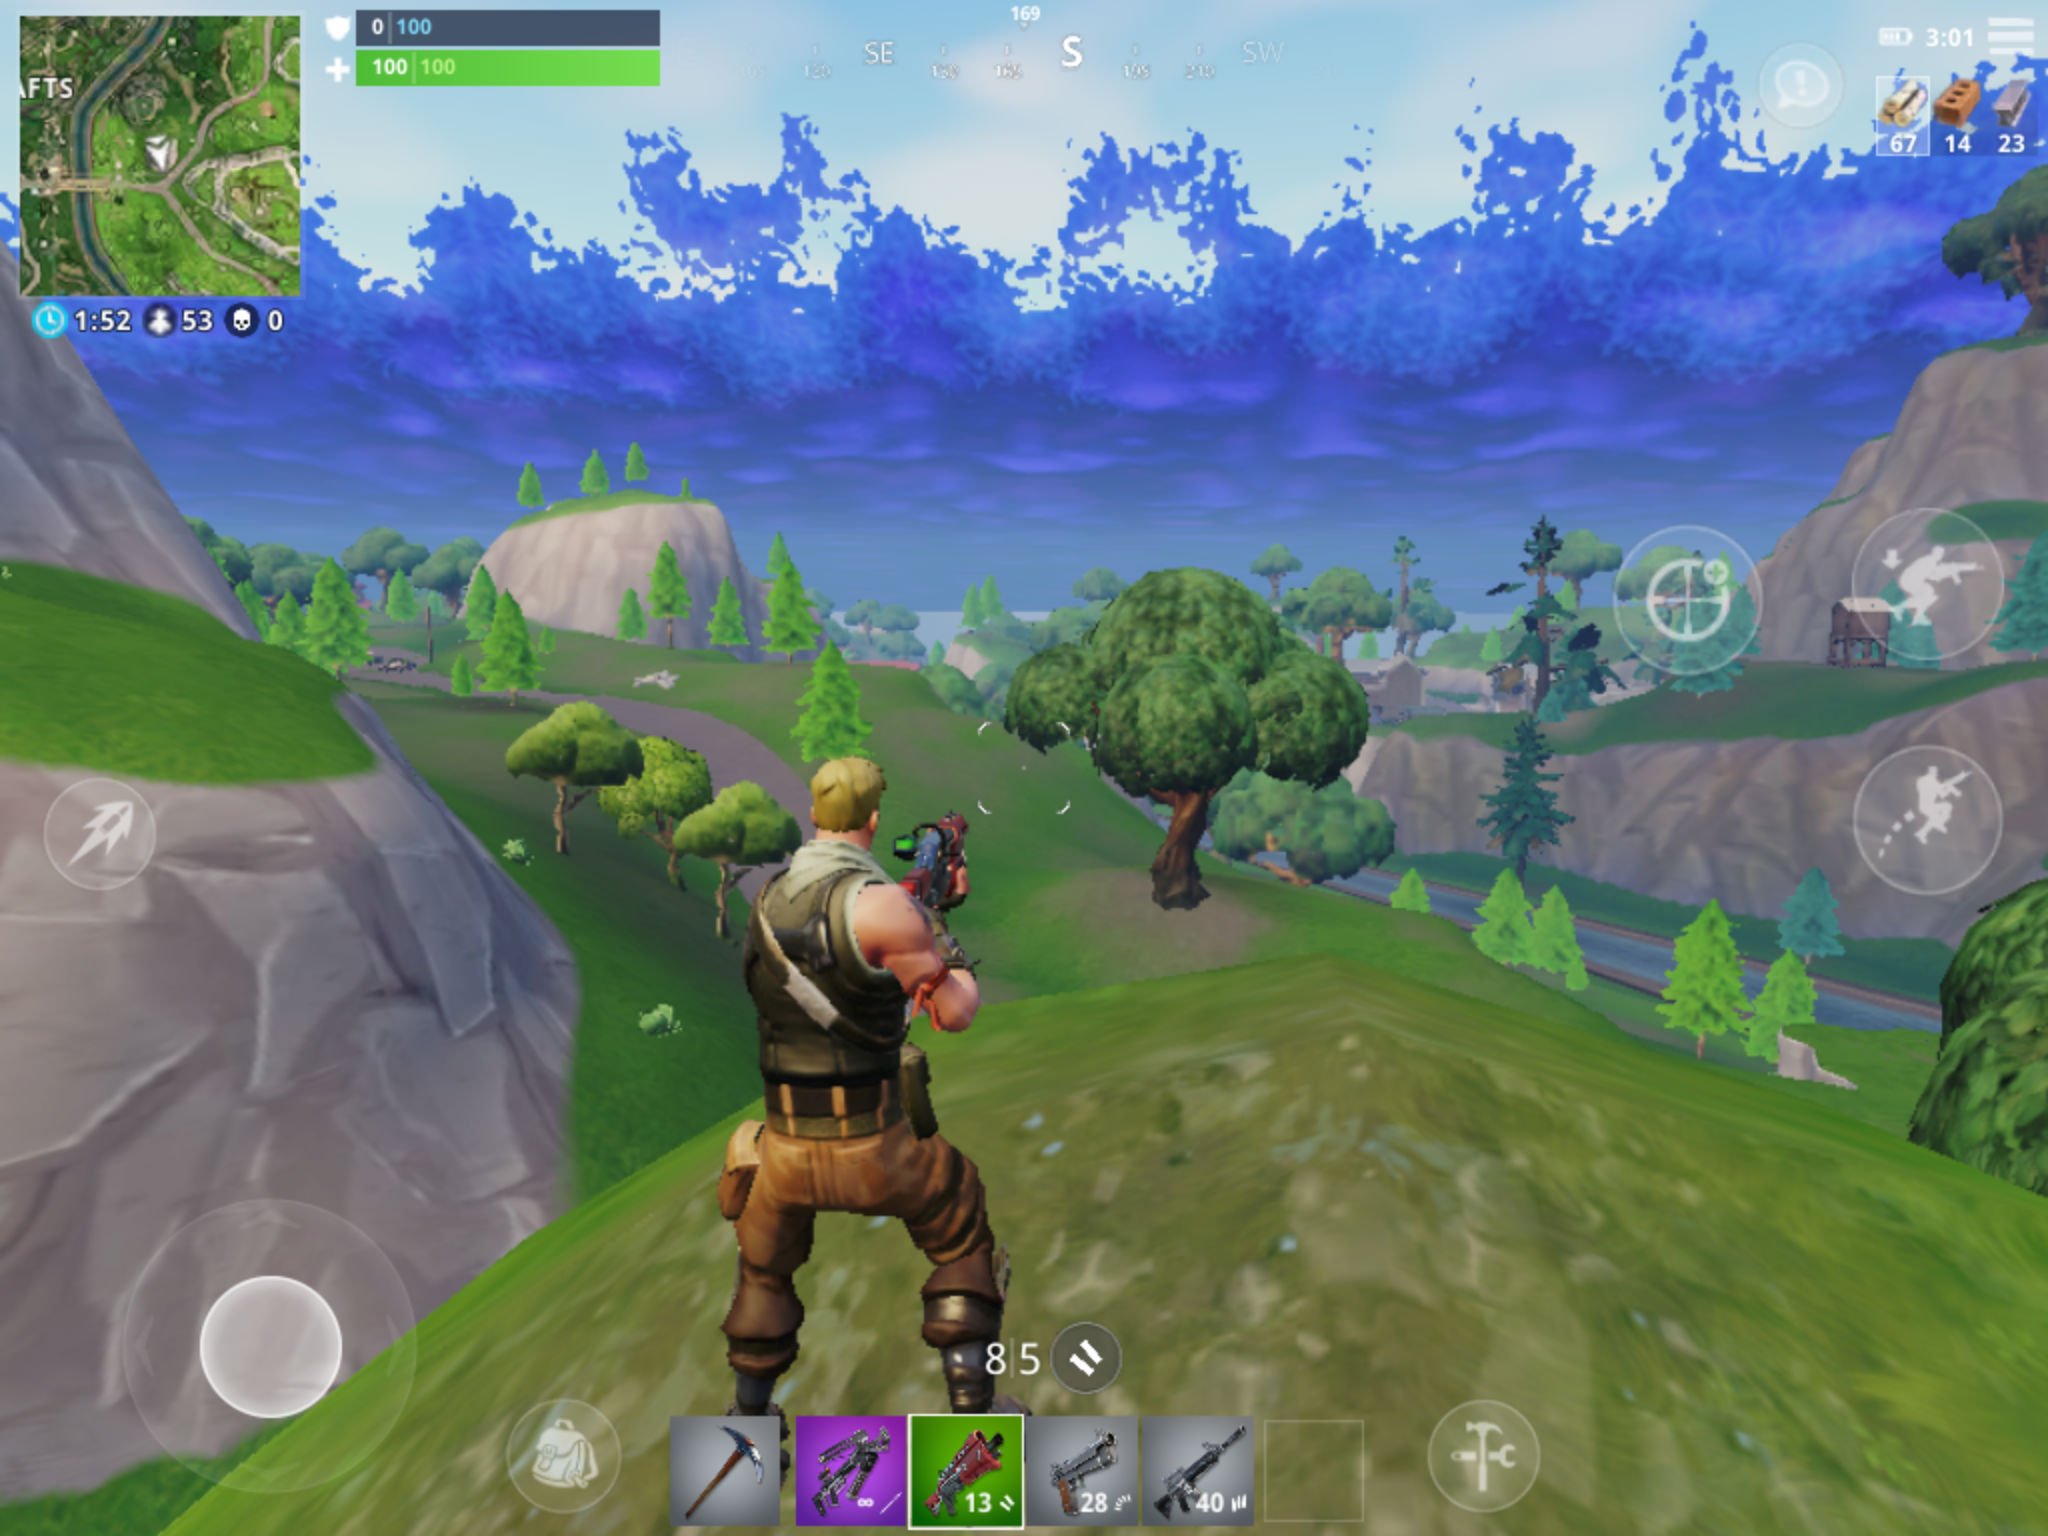 Fortnite is coming to Android soon, plus what else is on Epic’s mind for mobile